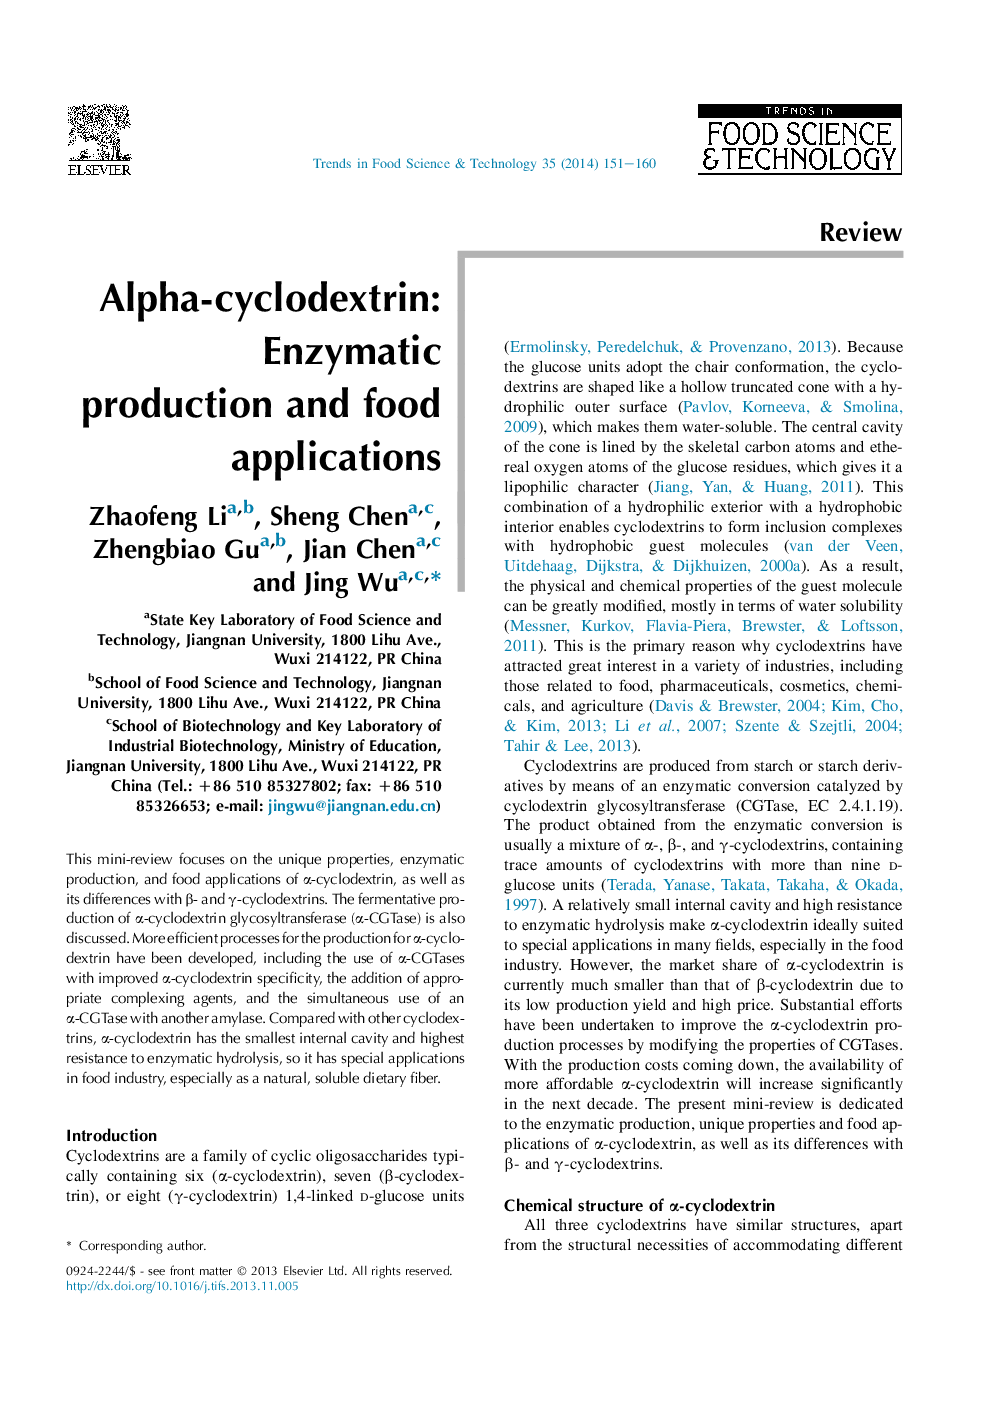 Alpha-cyclodextrin: Enzymatic production and food applications